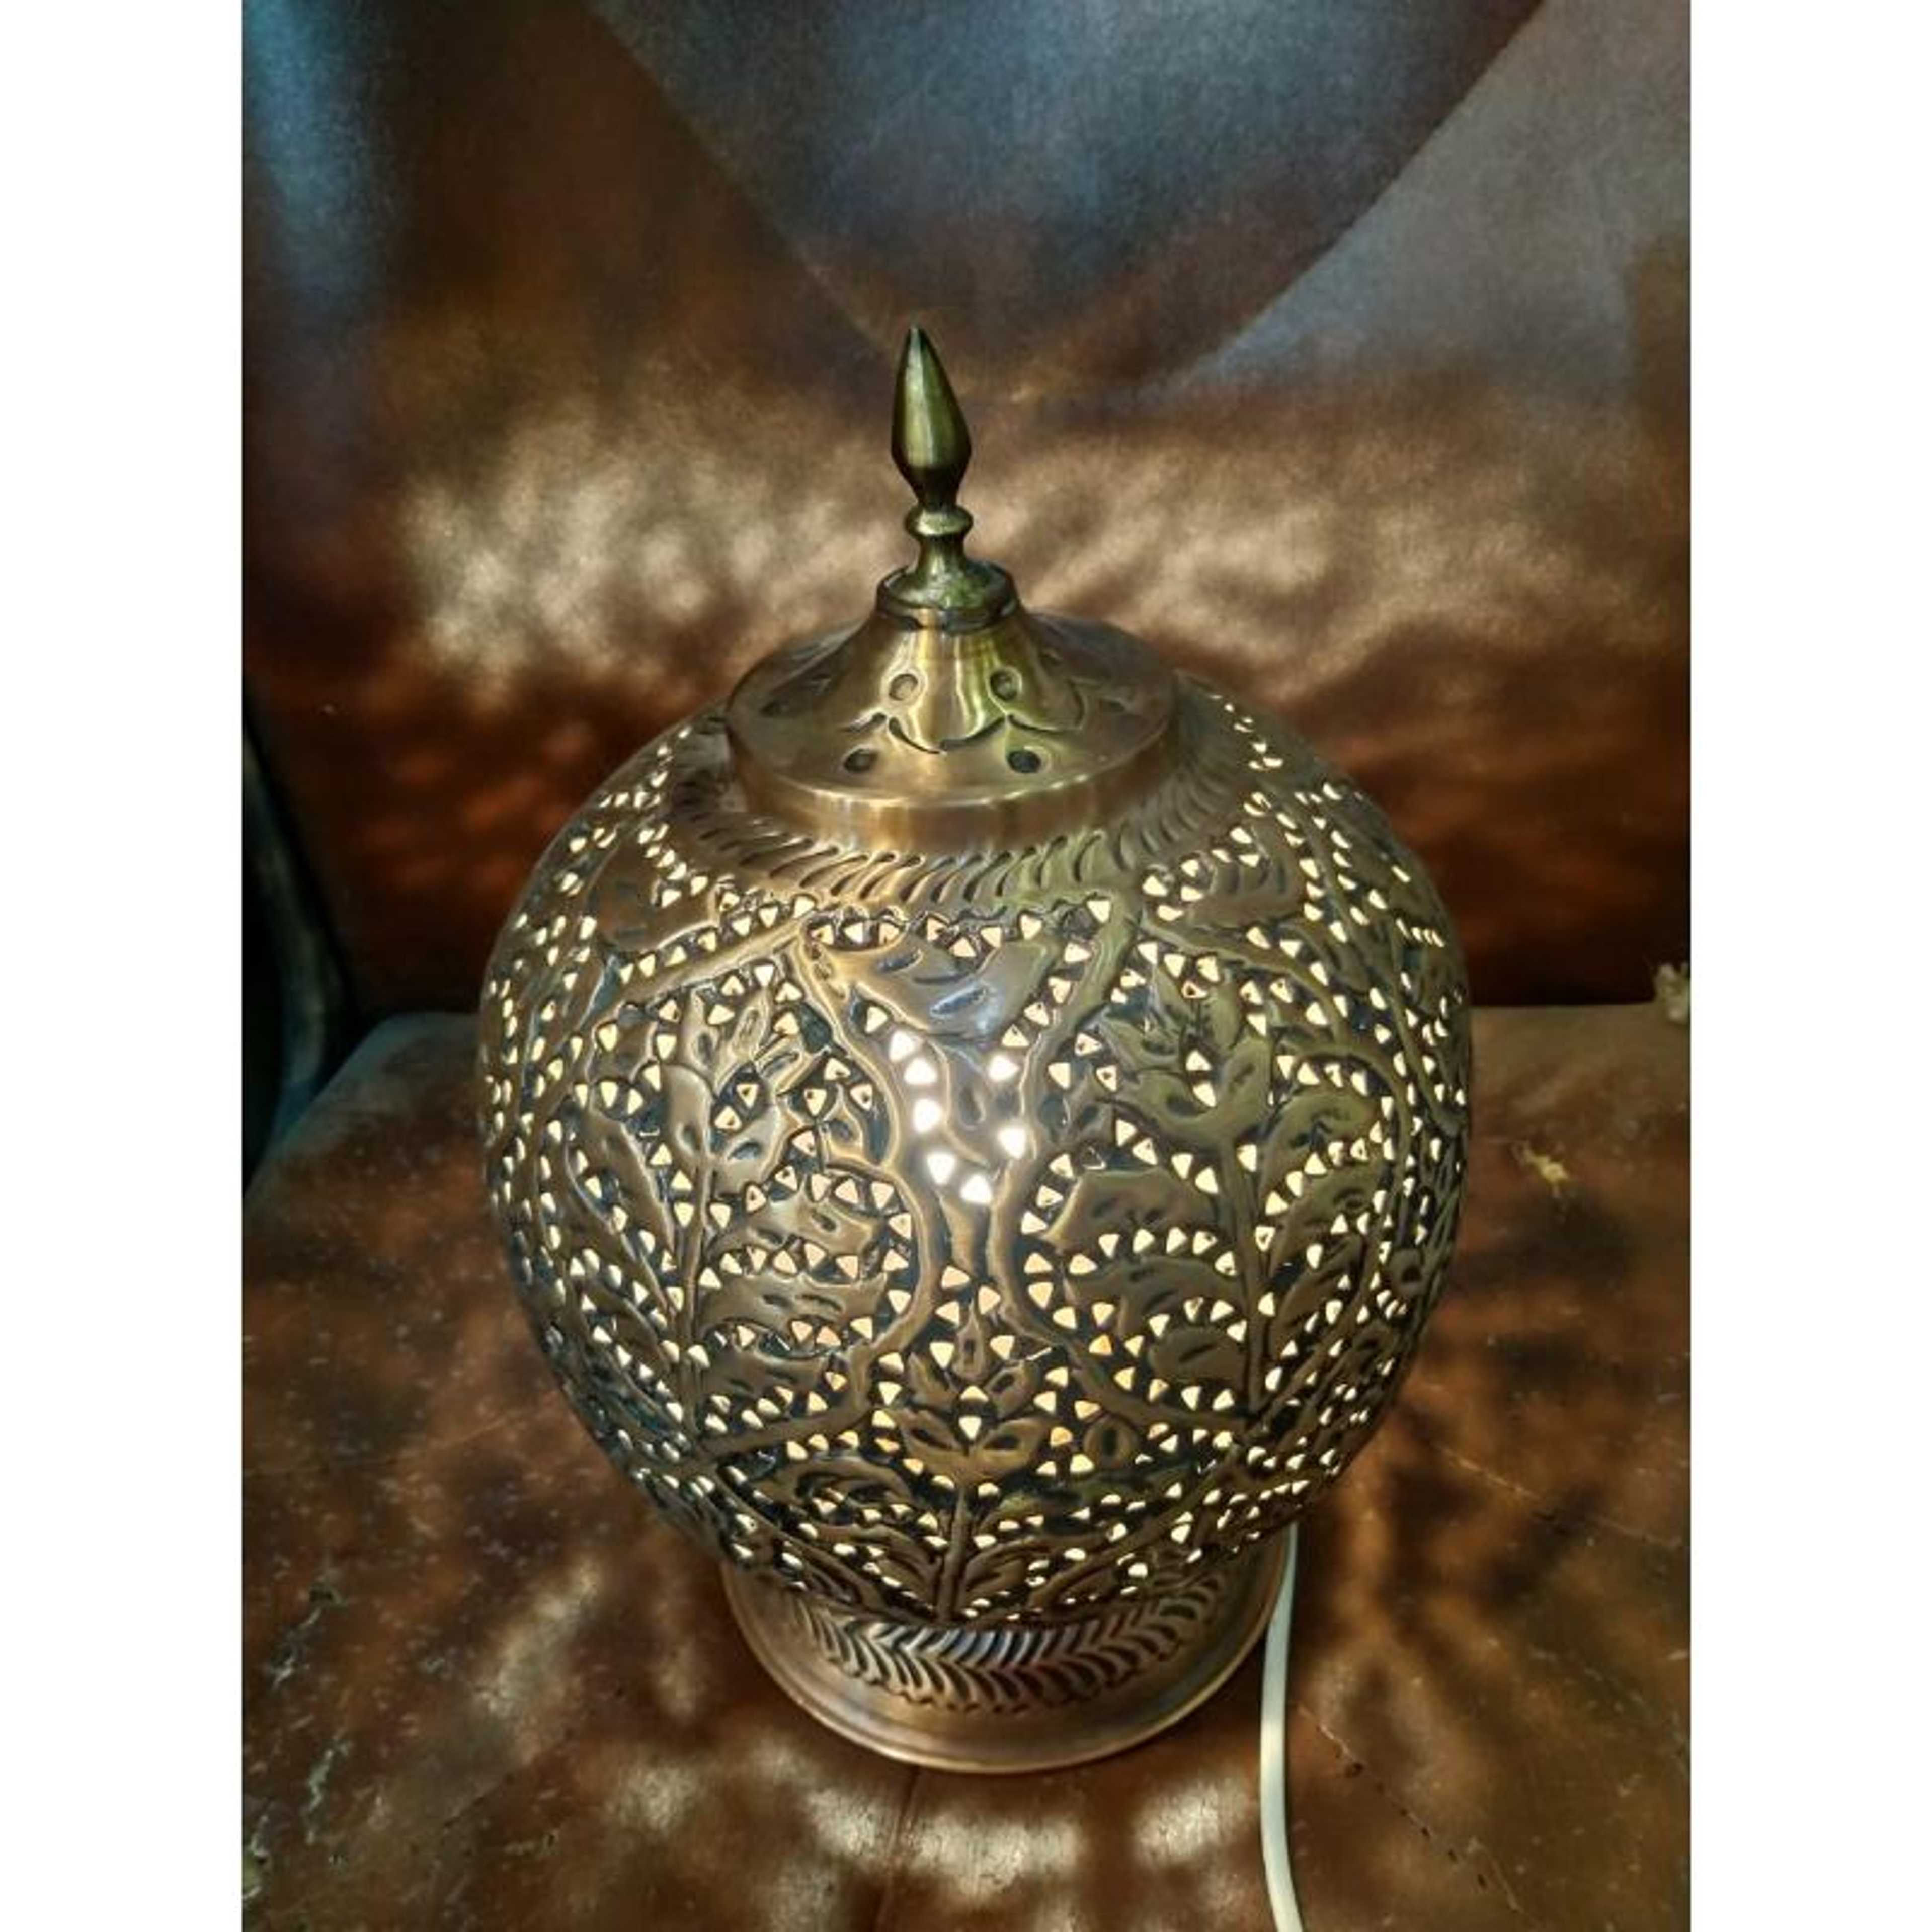 Antique Copper Lamp without shade